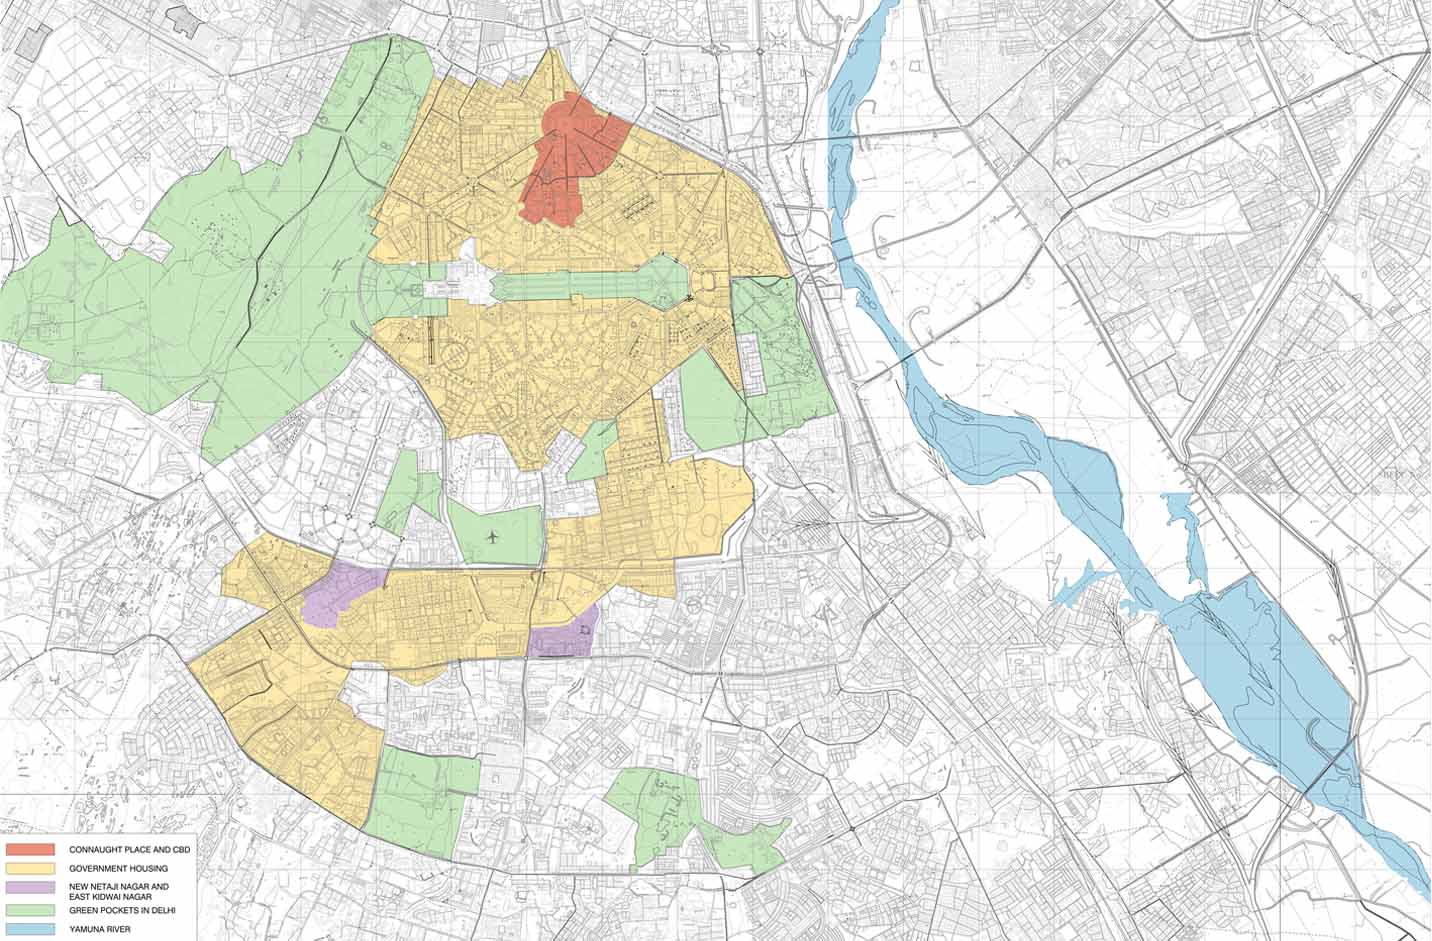 locating-smart-cities-plan-central-area-new-delhi-showing-government-land